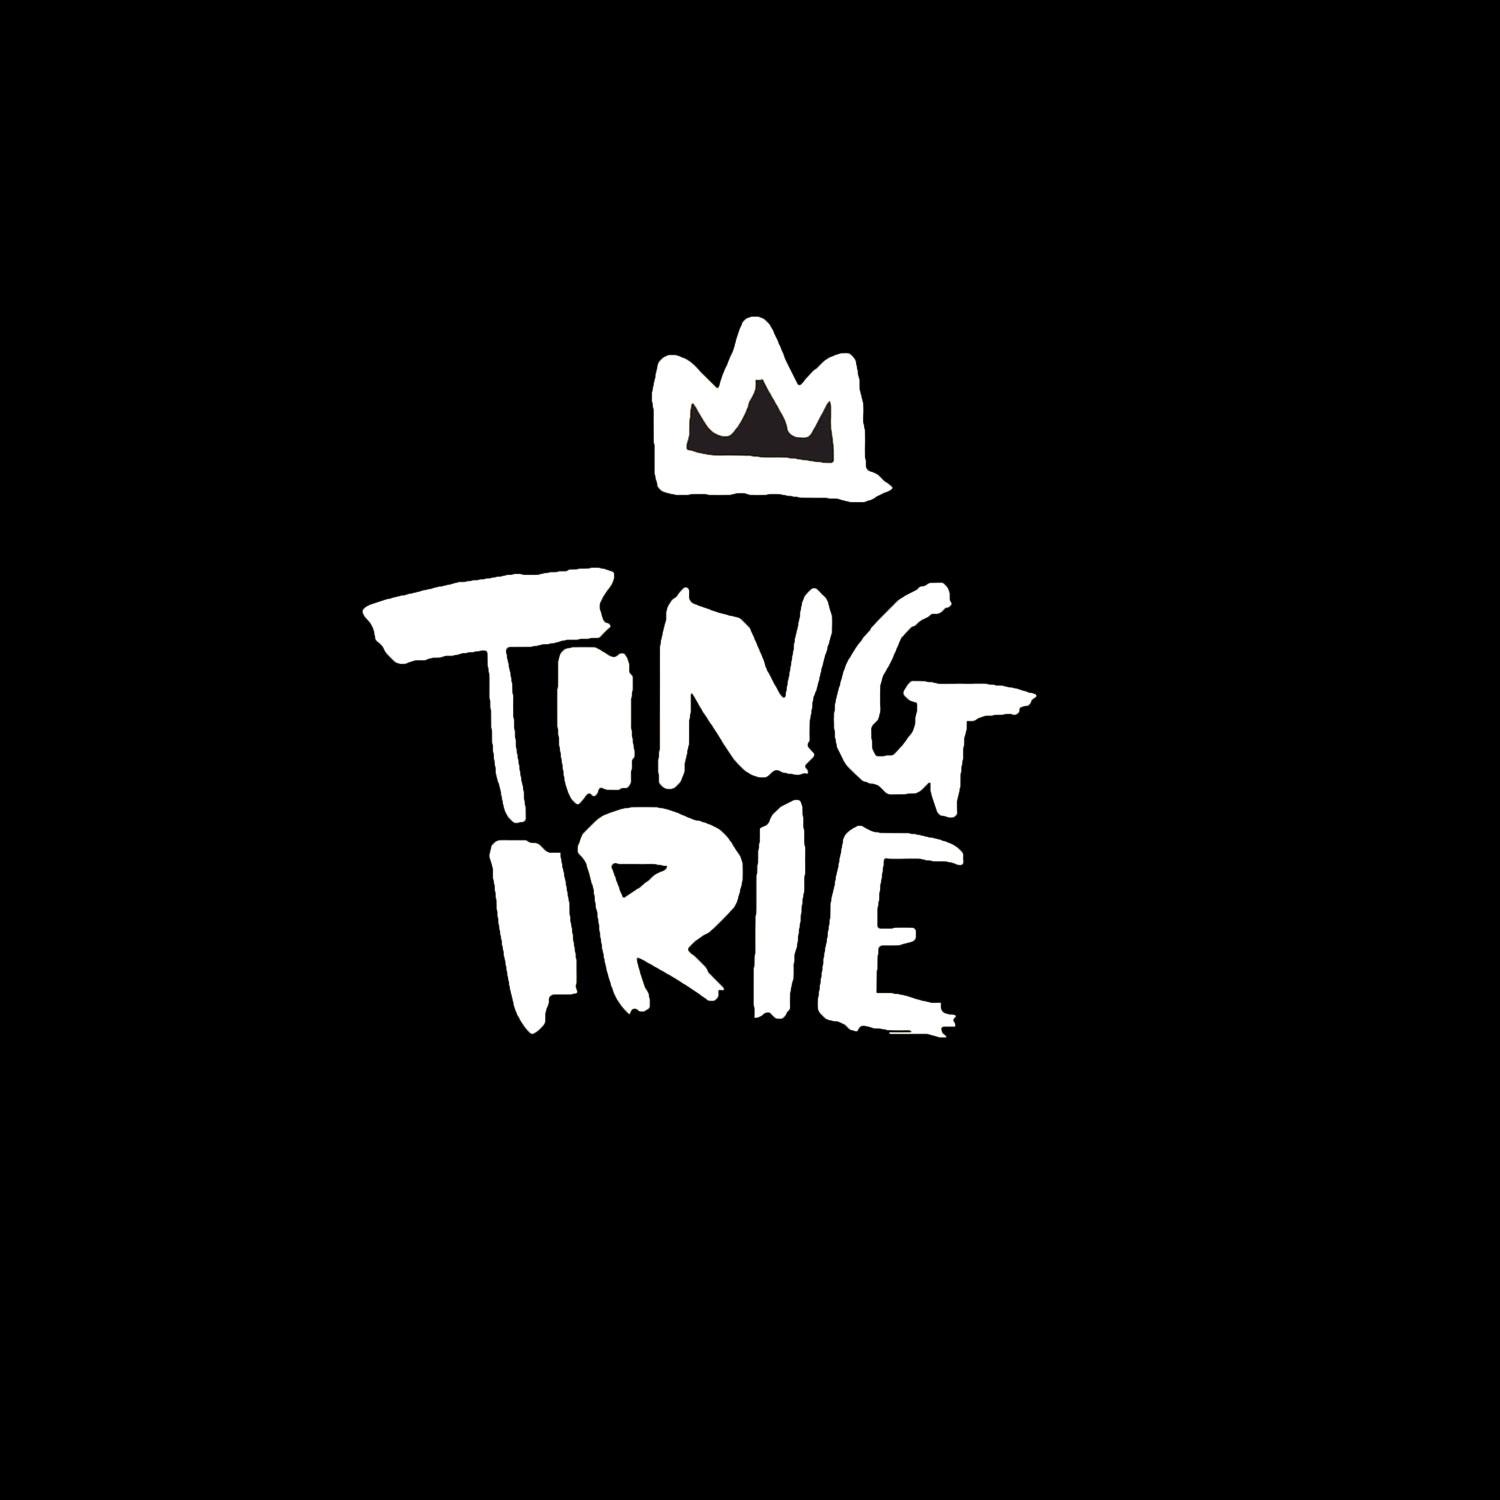 Thursday at Ting Irie